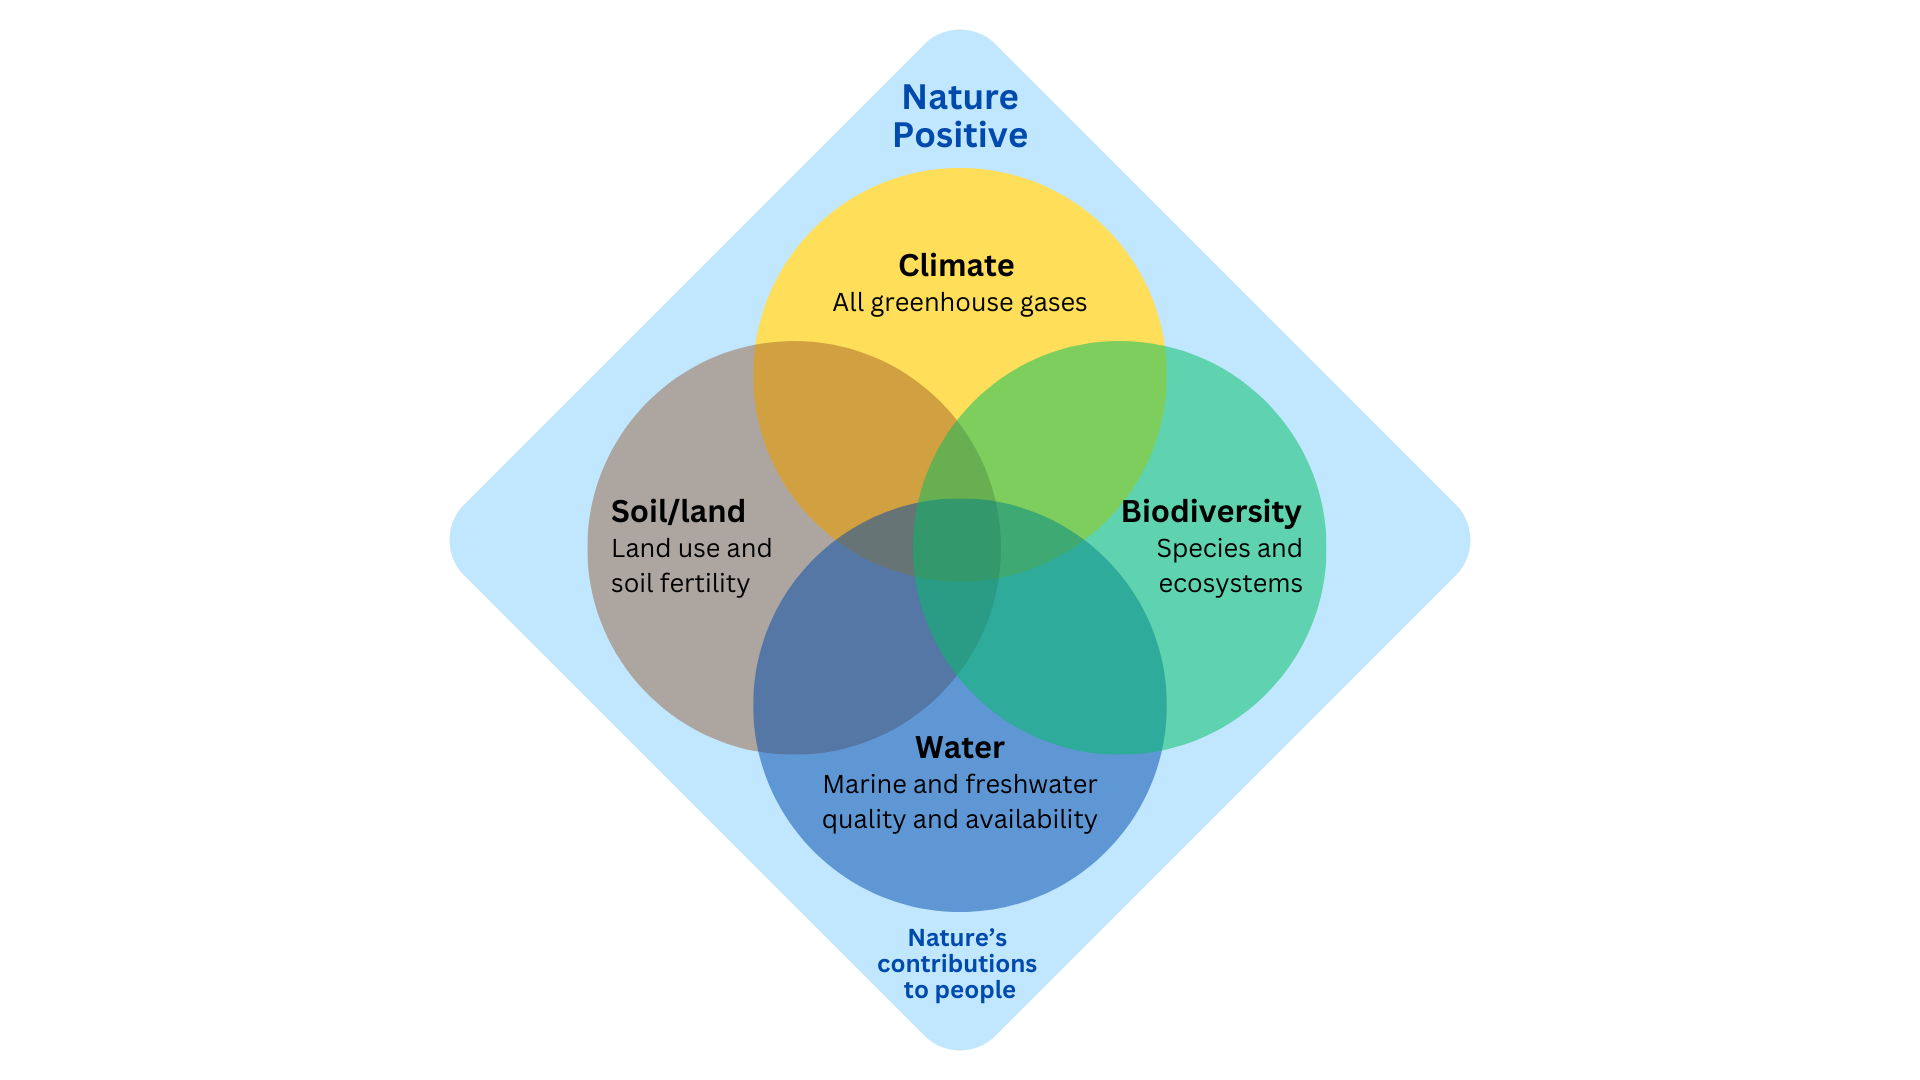 Venn diagram of Nature-Positive showing Climate, Biodiversity, Soil and Water components